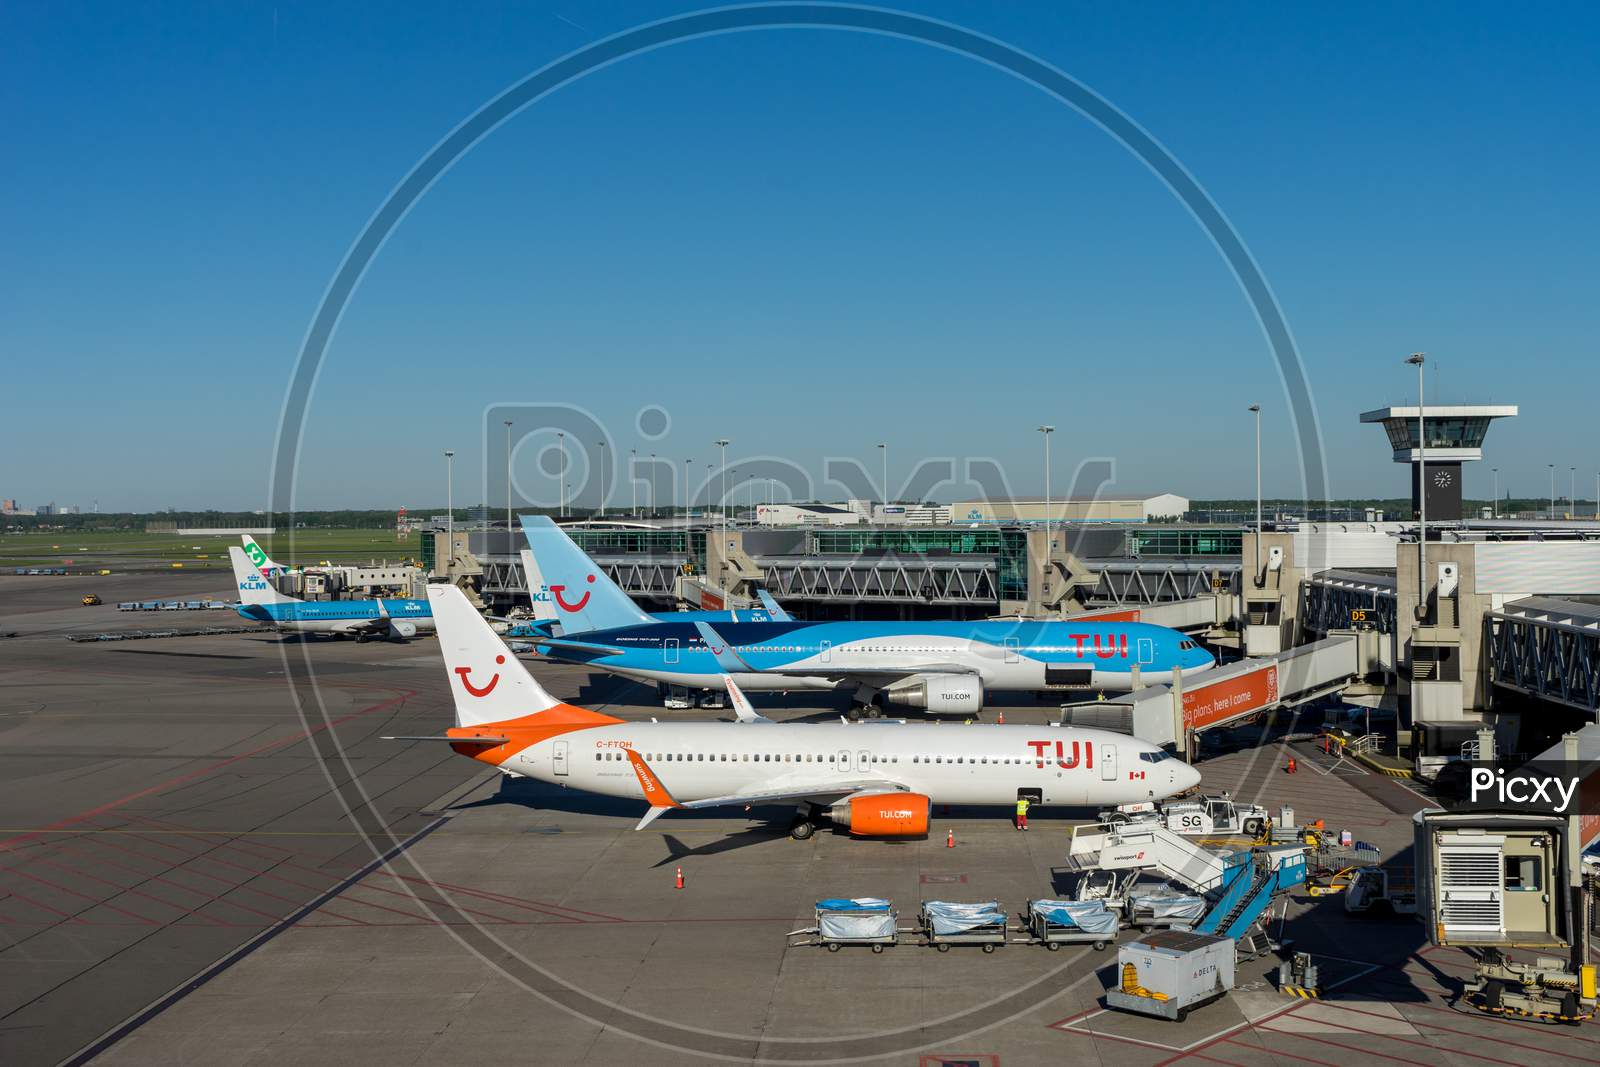 Netherlands, Amsterdam, Schiphol - 06 May, 2018: Tui Planes At Airport. Schiphol Is One Of The Busiest Airport In Europe.